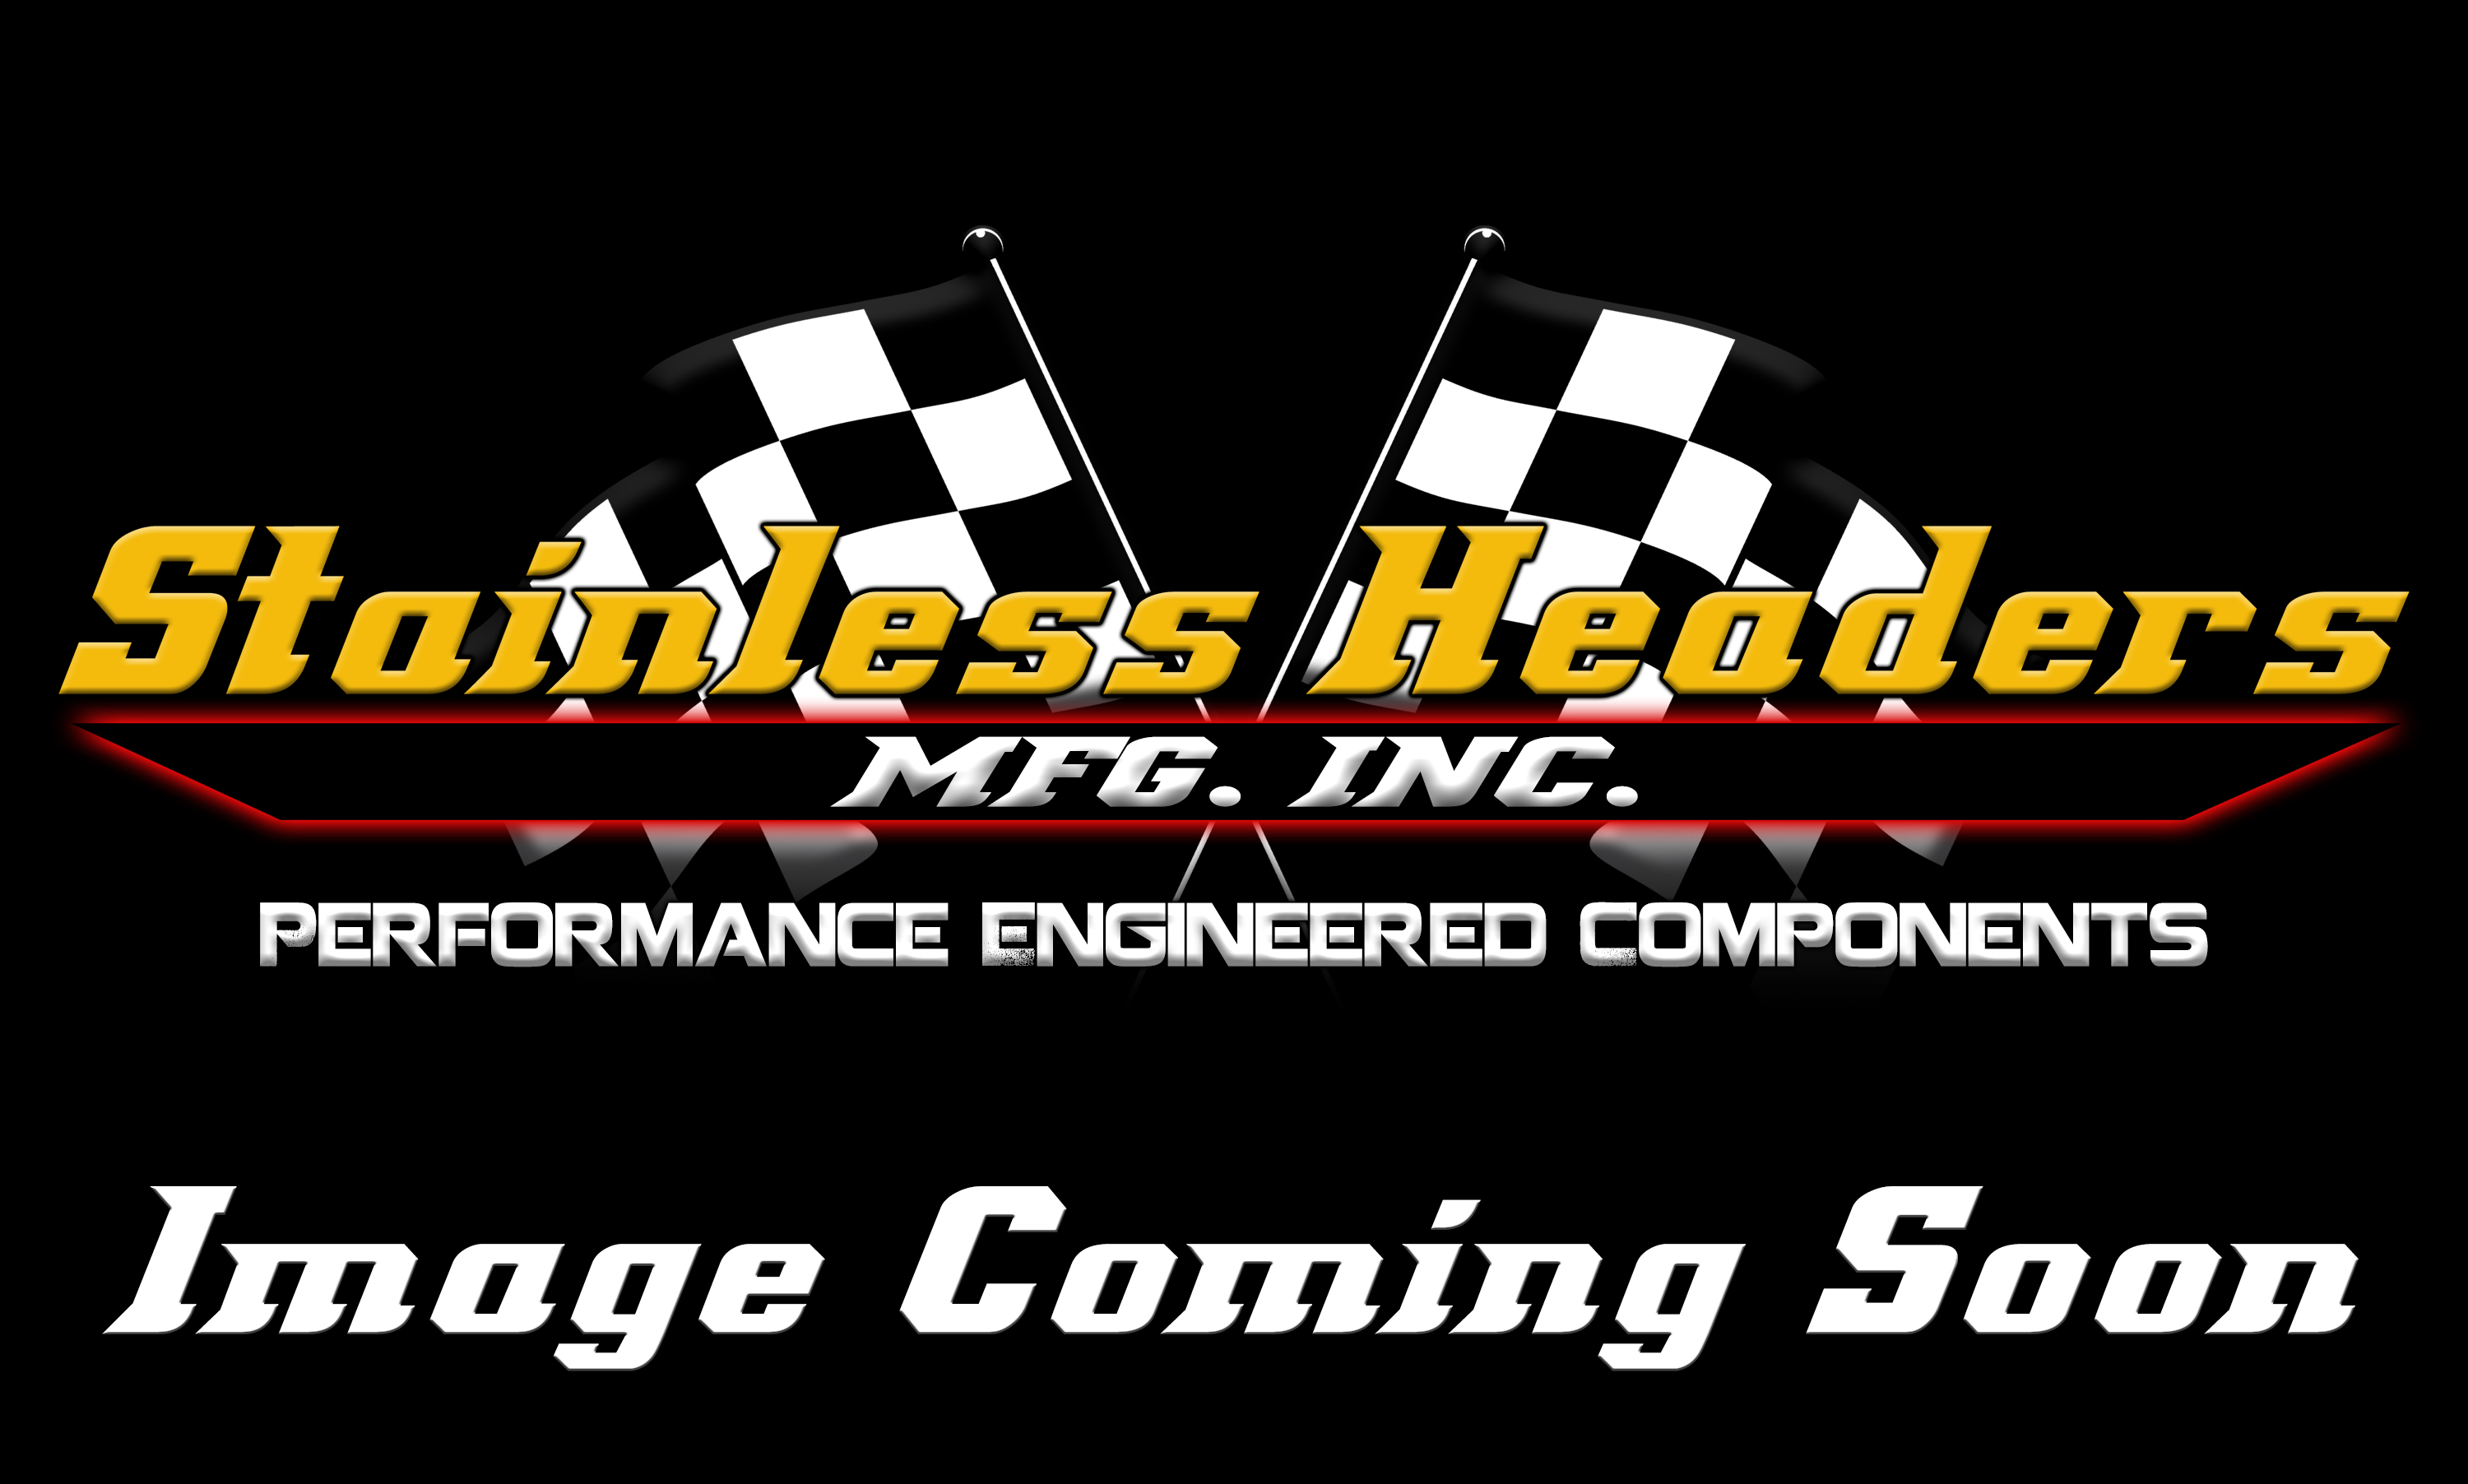 Performance Turbochargers - CompTurbo Technology Turbochargers - CompTurbo Technologies - CTR3081SR-5858 Reverse Rotation 360 Journal Bearing Turbocharger (650 HP)